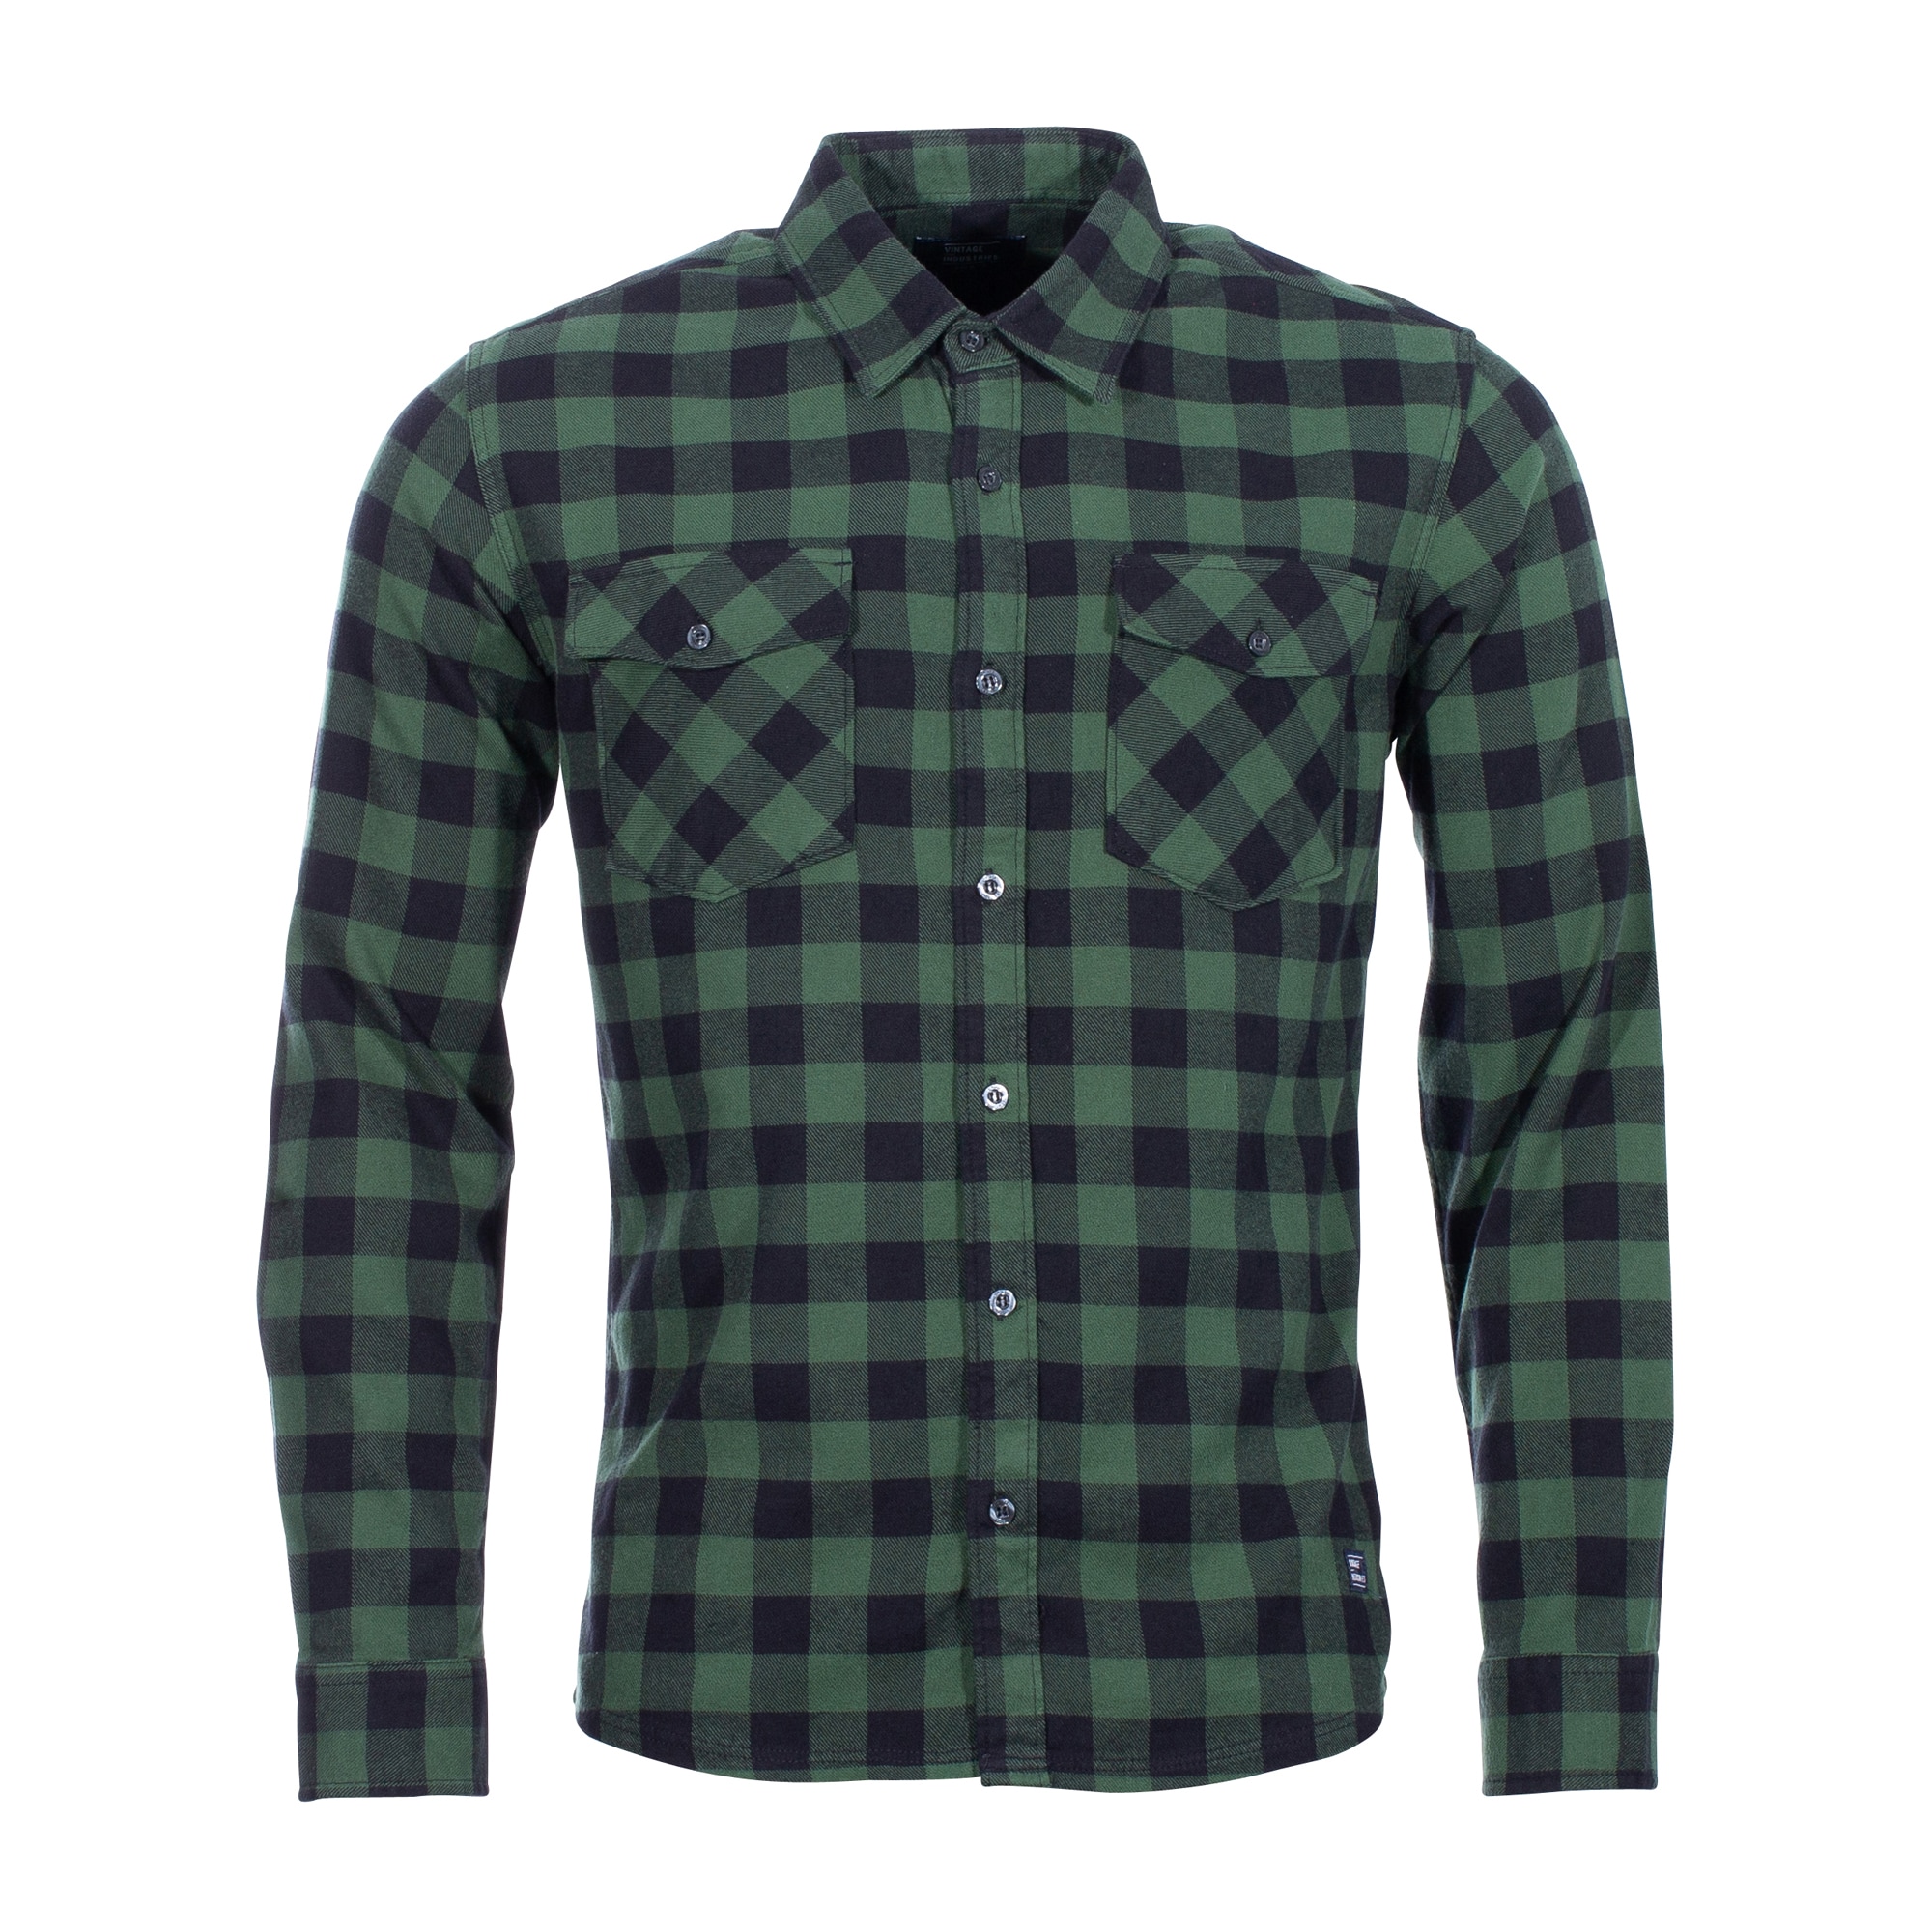 Purchase the Vintage Industries Harley Shirt green check by ASMC